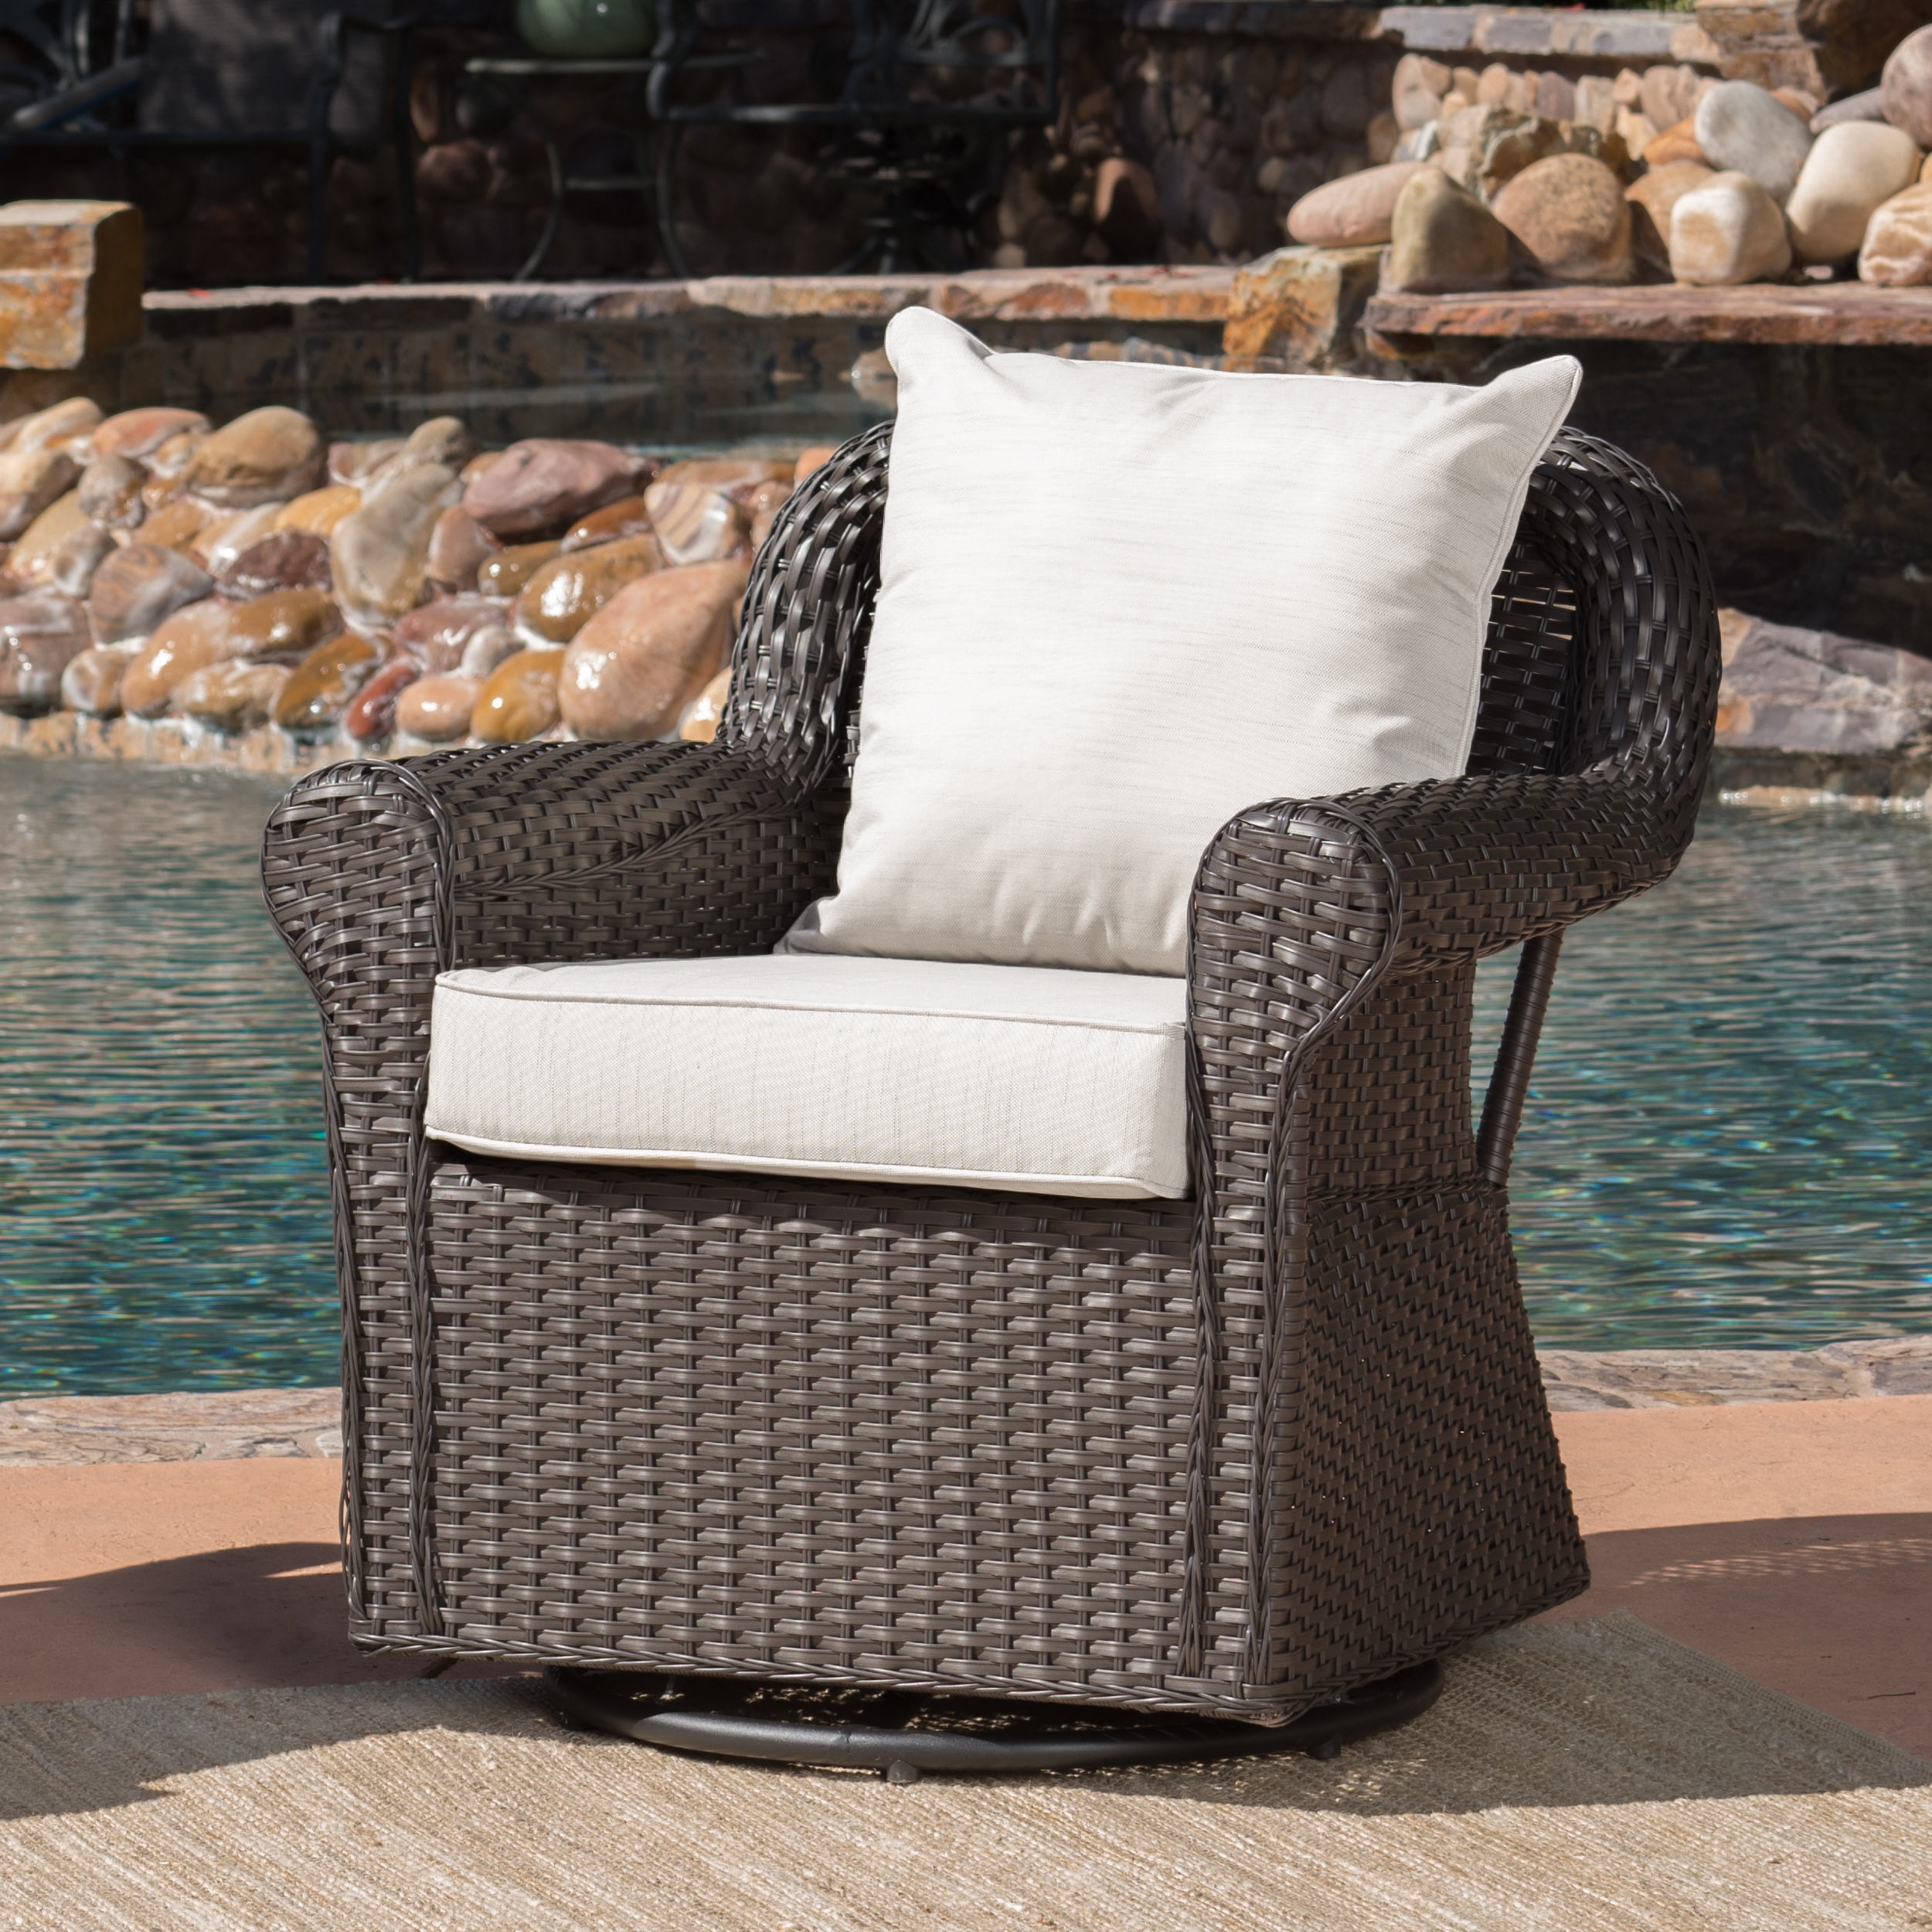 Aulena Outdoor Wicker Swivel Rocking Chair with Cushions, Dark Brown